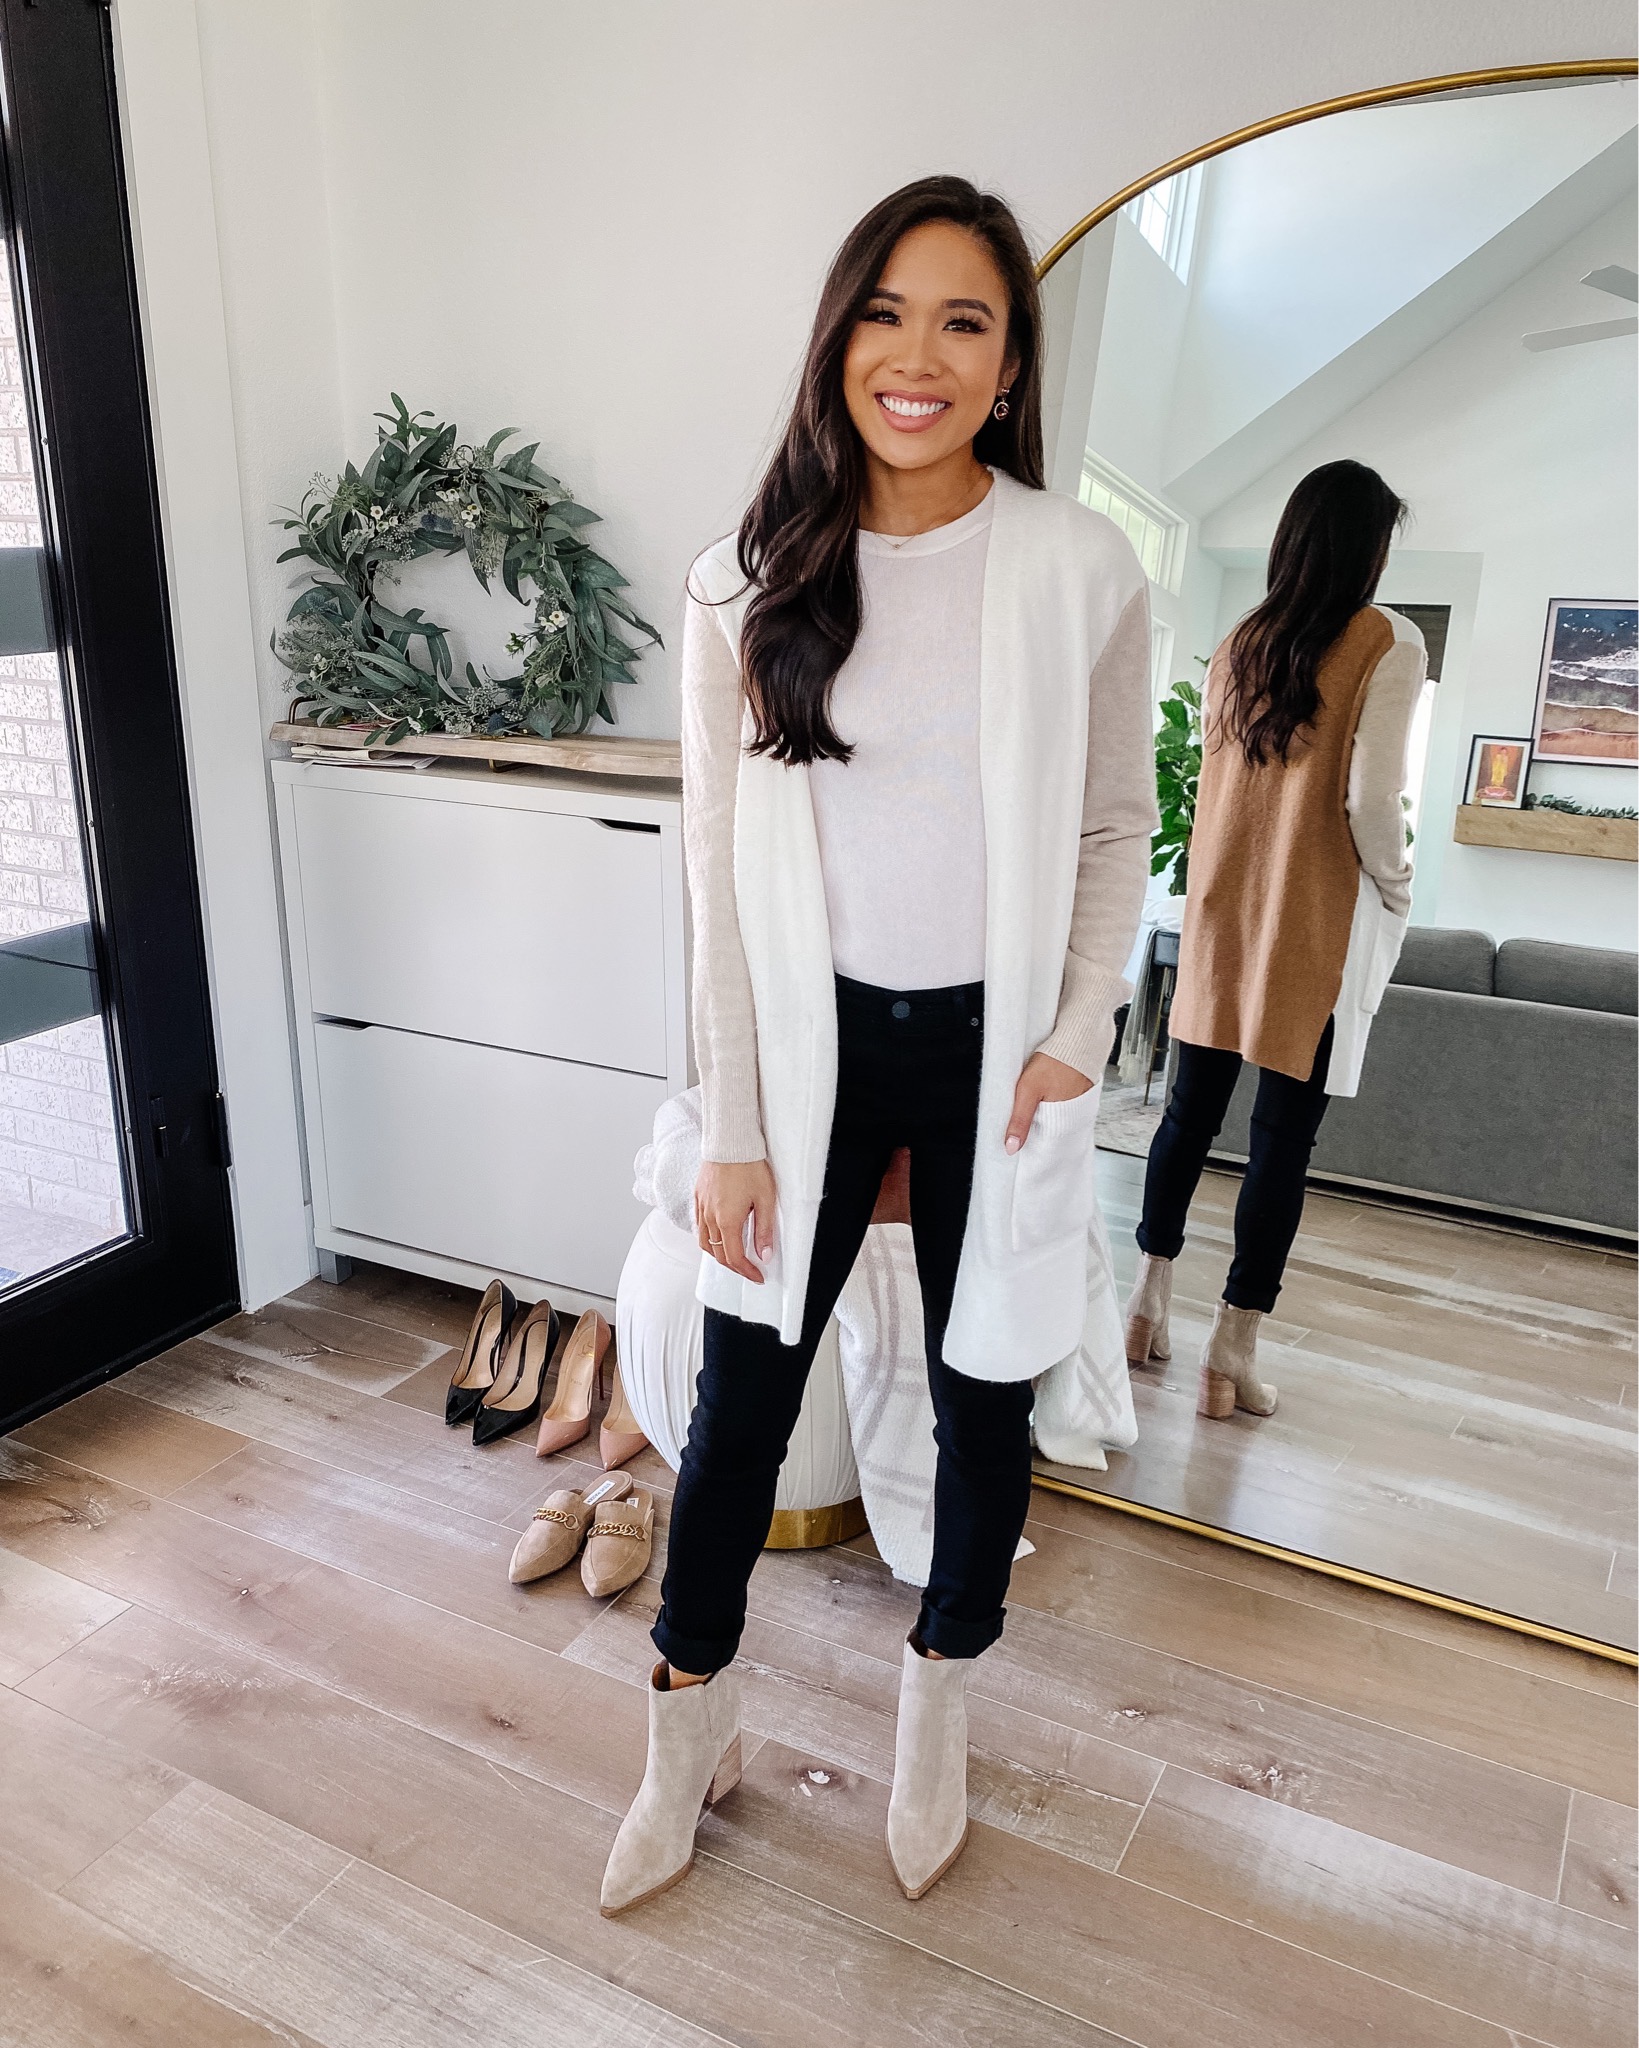 Blogger Hoang-Kim wears the Madewell Kent Colorblock Cardigan in Heathered TImber with Black AG The legging jeans, Marc Fisher Booties in her entryway with a Rejuvenation arched floor mirror